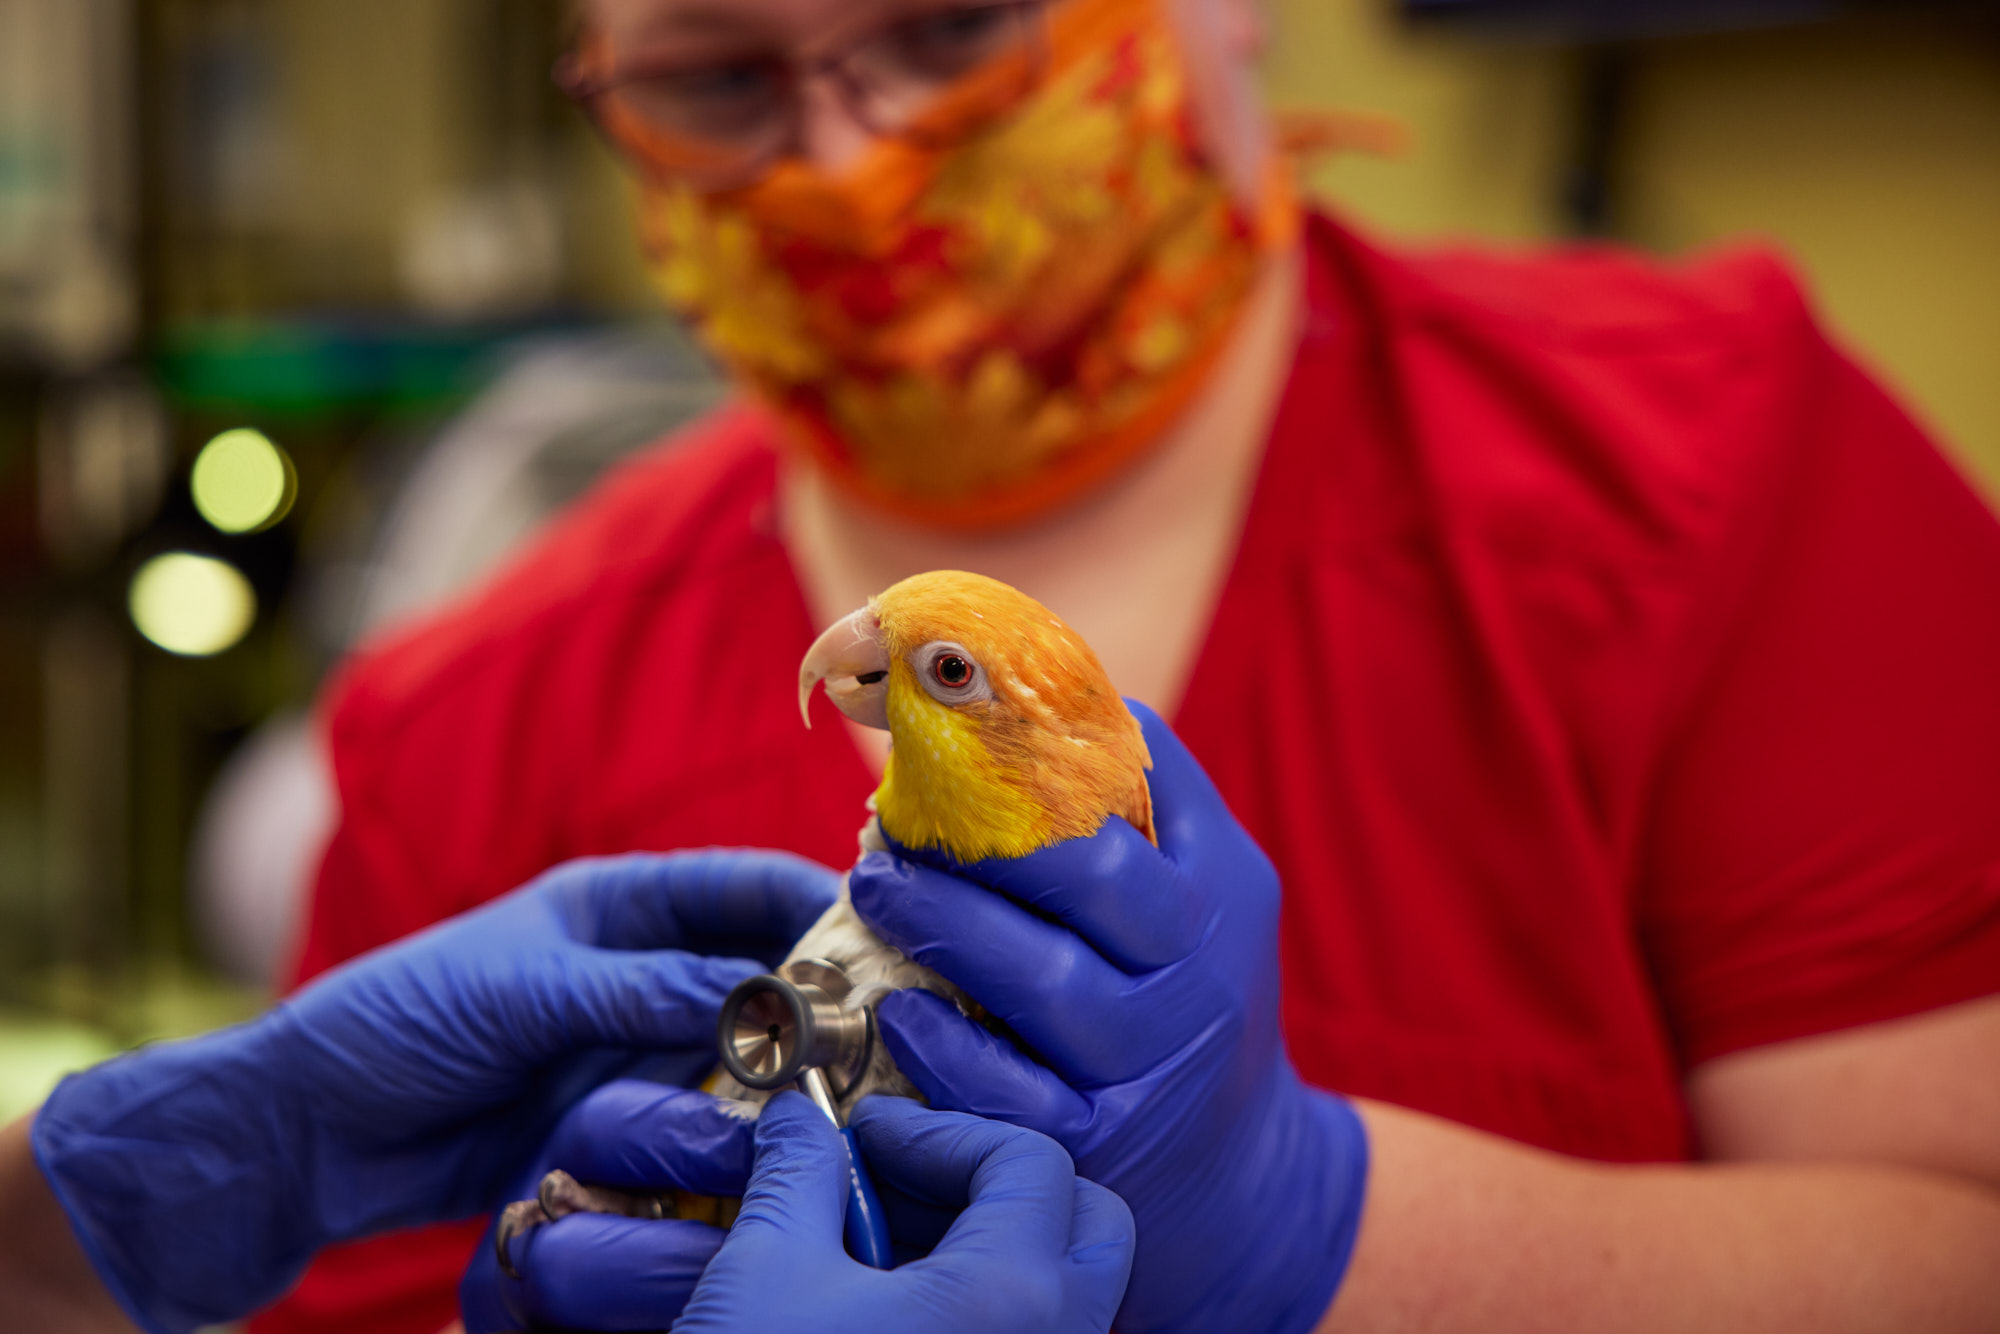 Exotic Bird and Stethoscope | Healthcare Lifestyle Photography